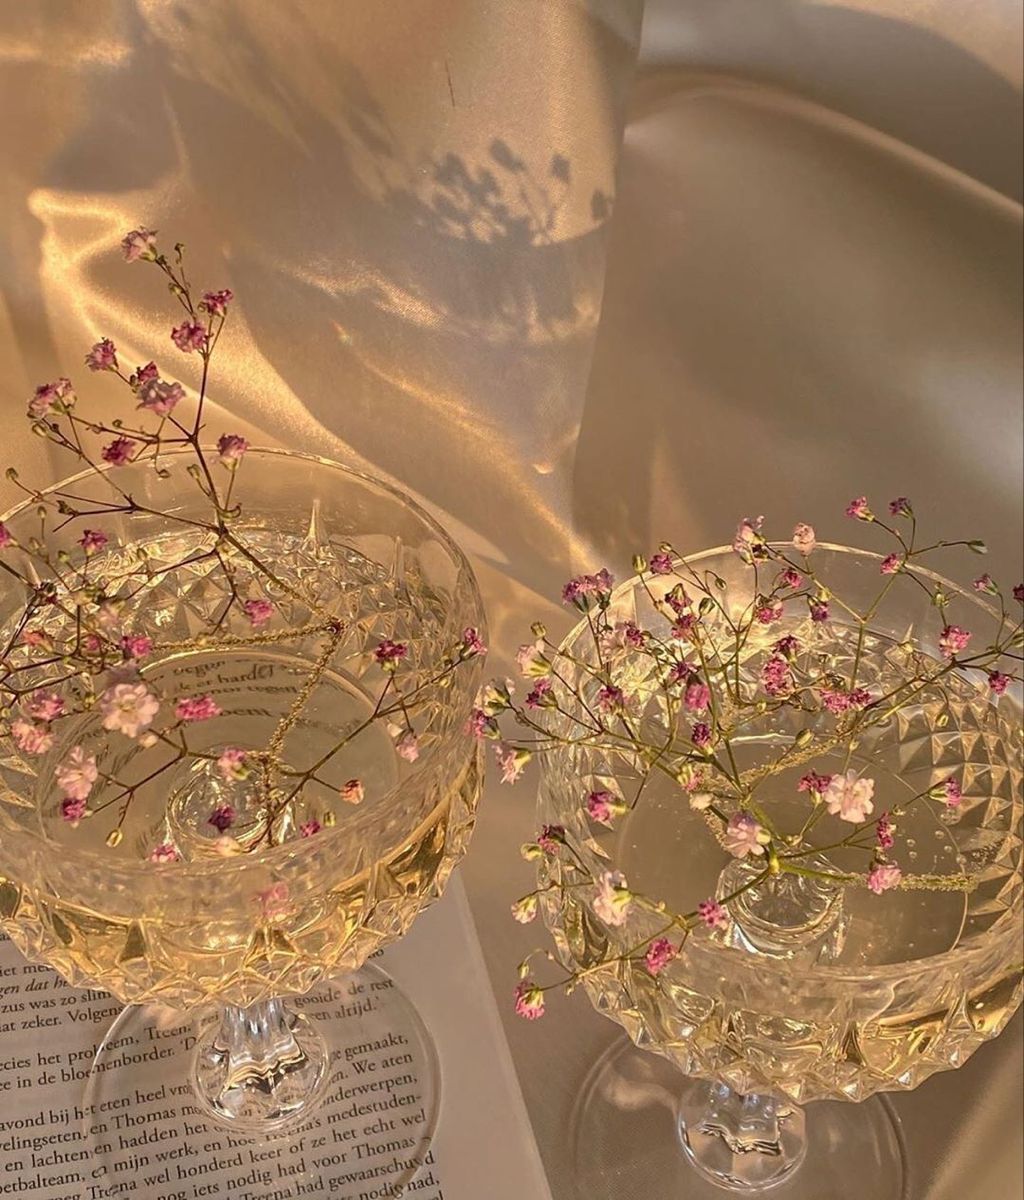 Two wine glasses with flowers in them on a table - Champagne